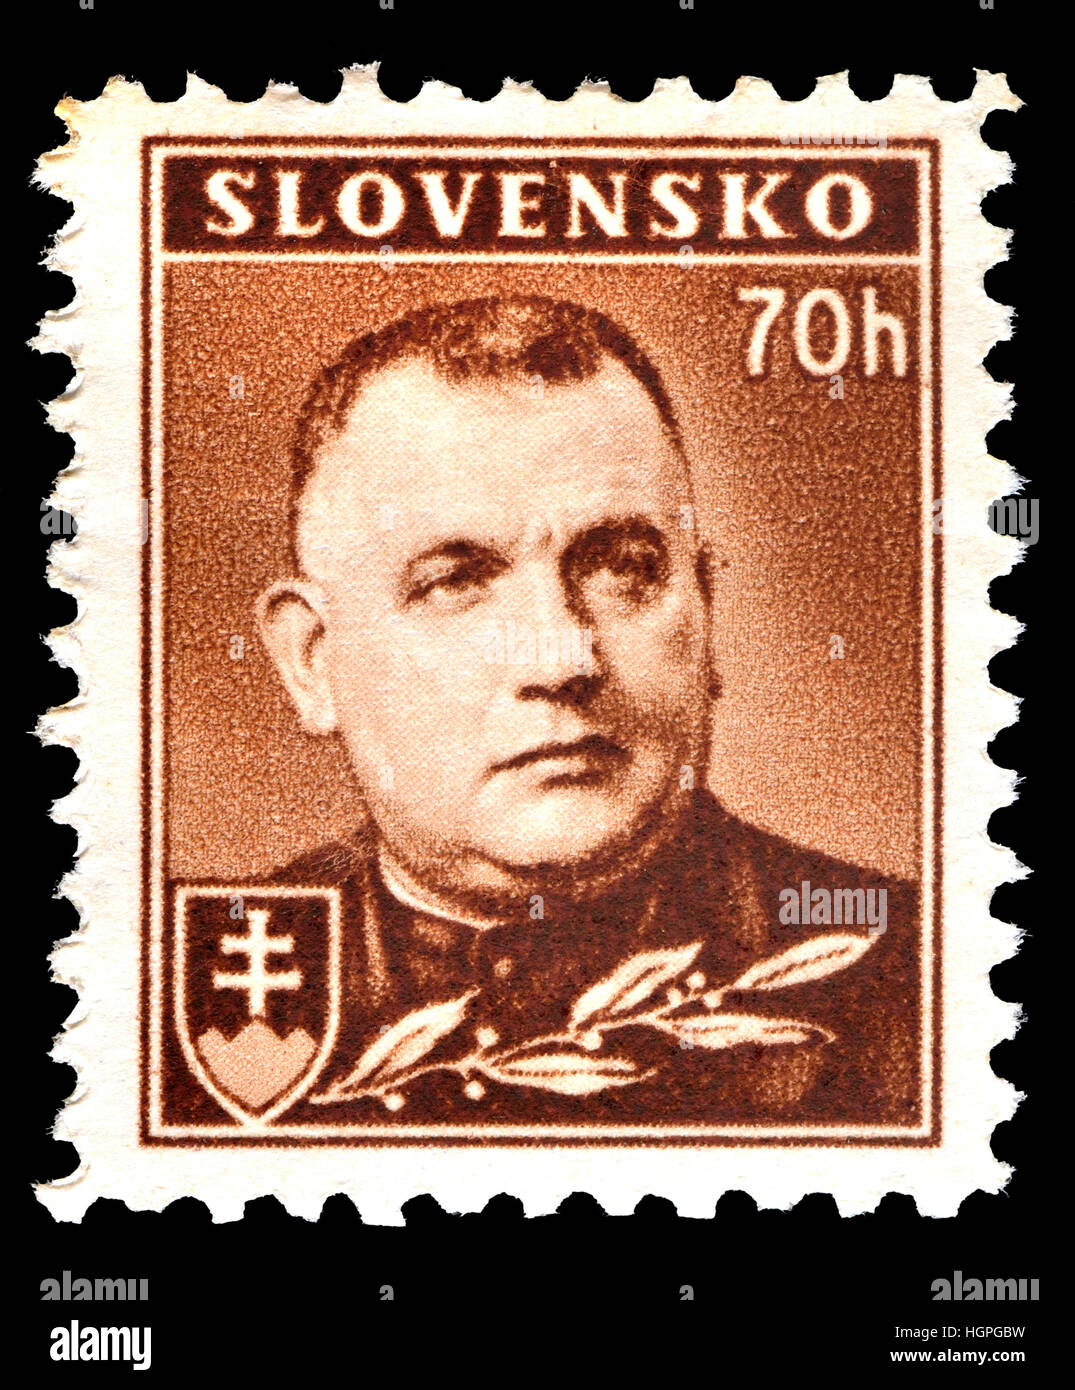 Slovak postage stamp (1942) - President Jozef Tiso (1887-1947)  Roman Catholic priest, Prime Minister and later President of the First Slovak Republic Stock Photo